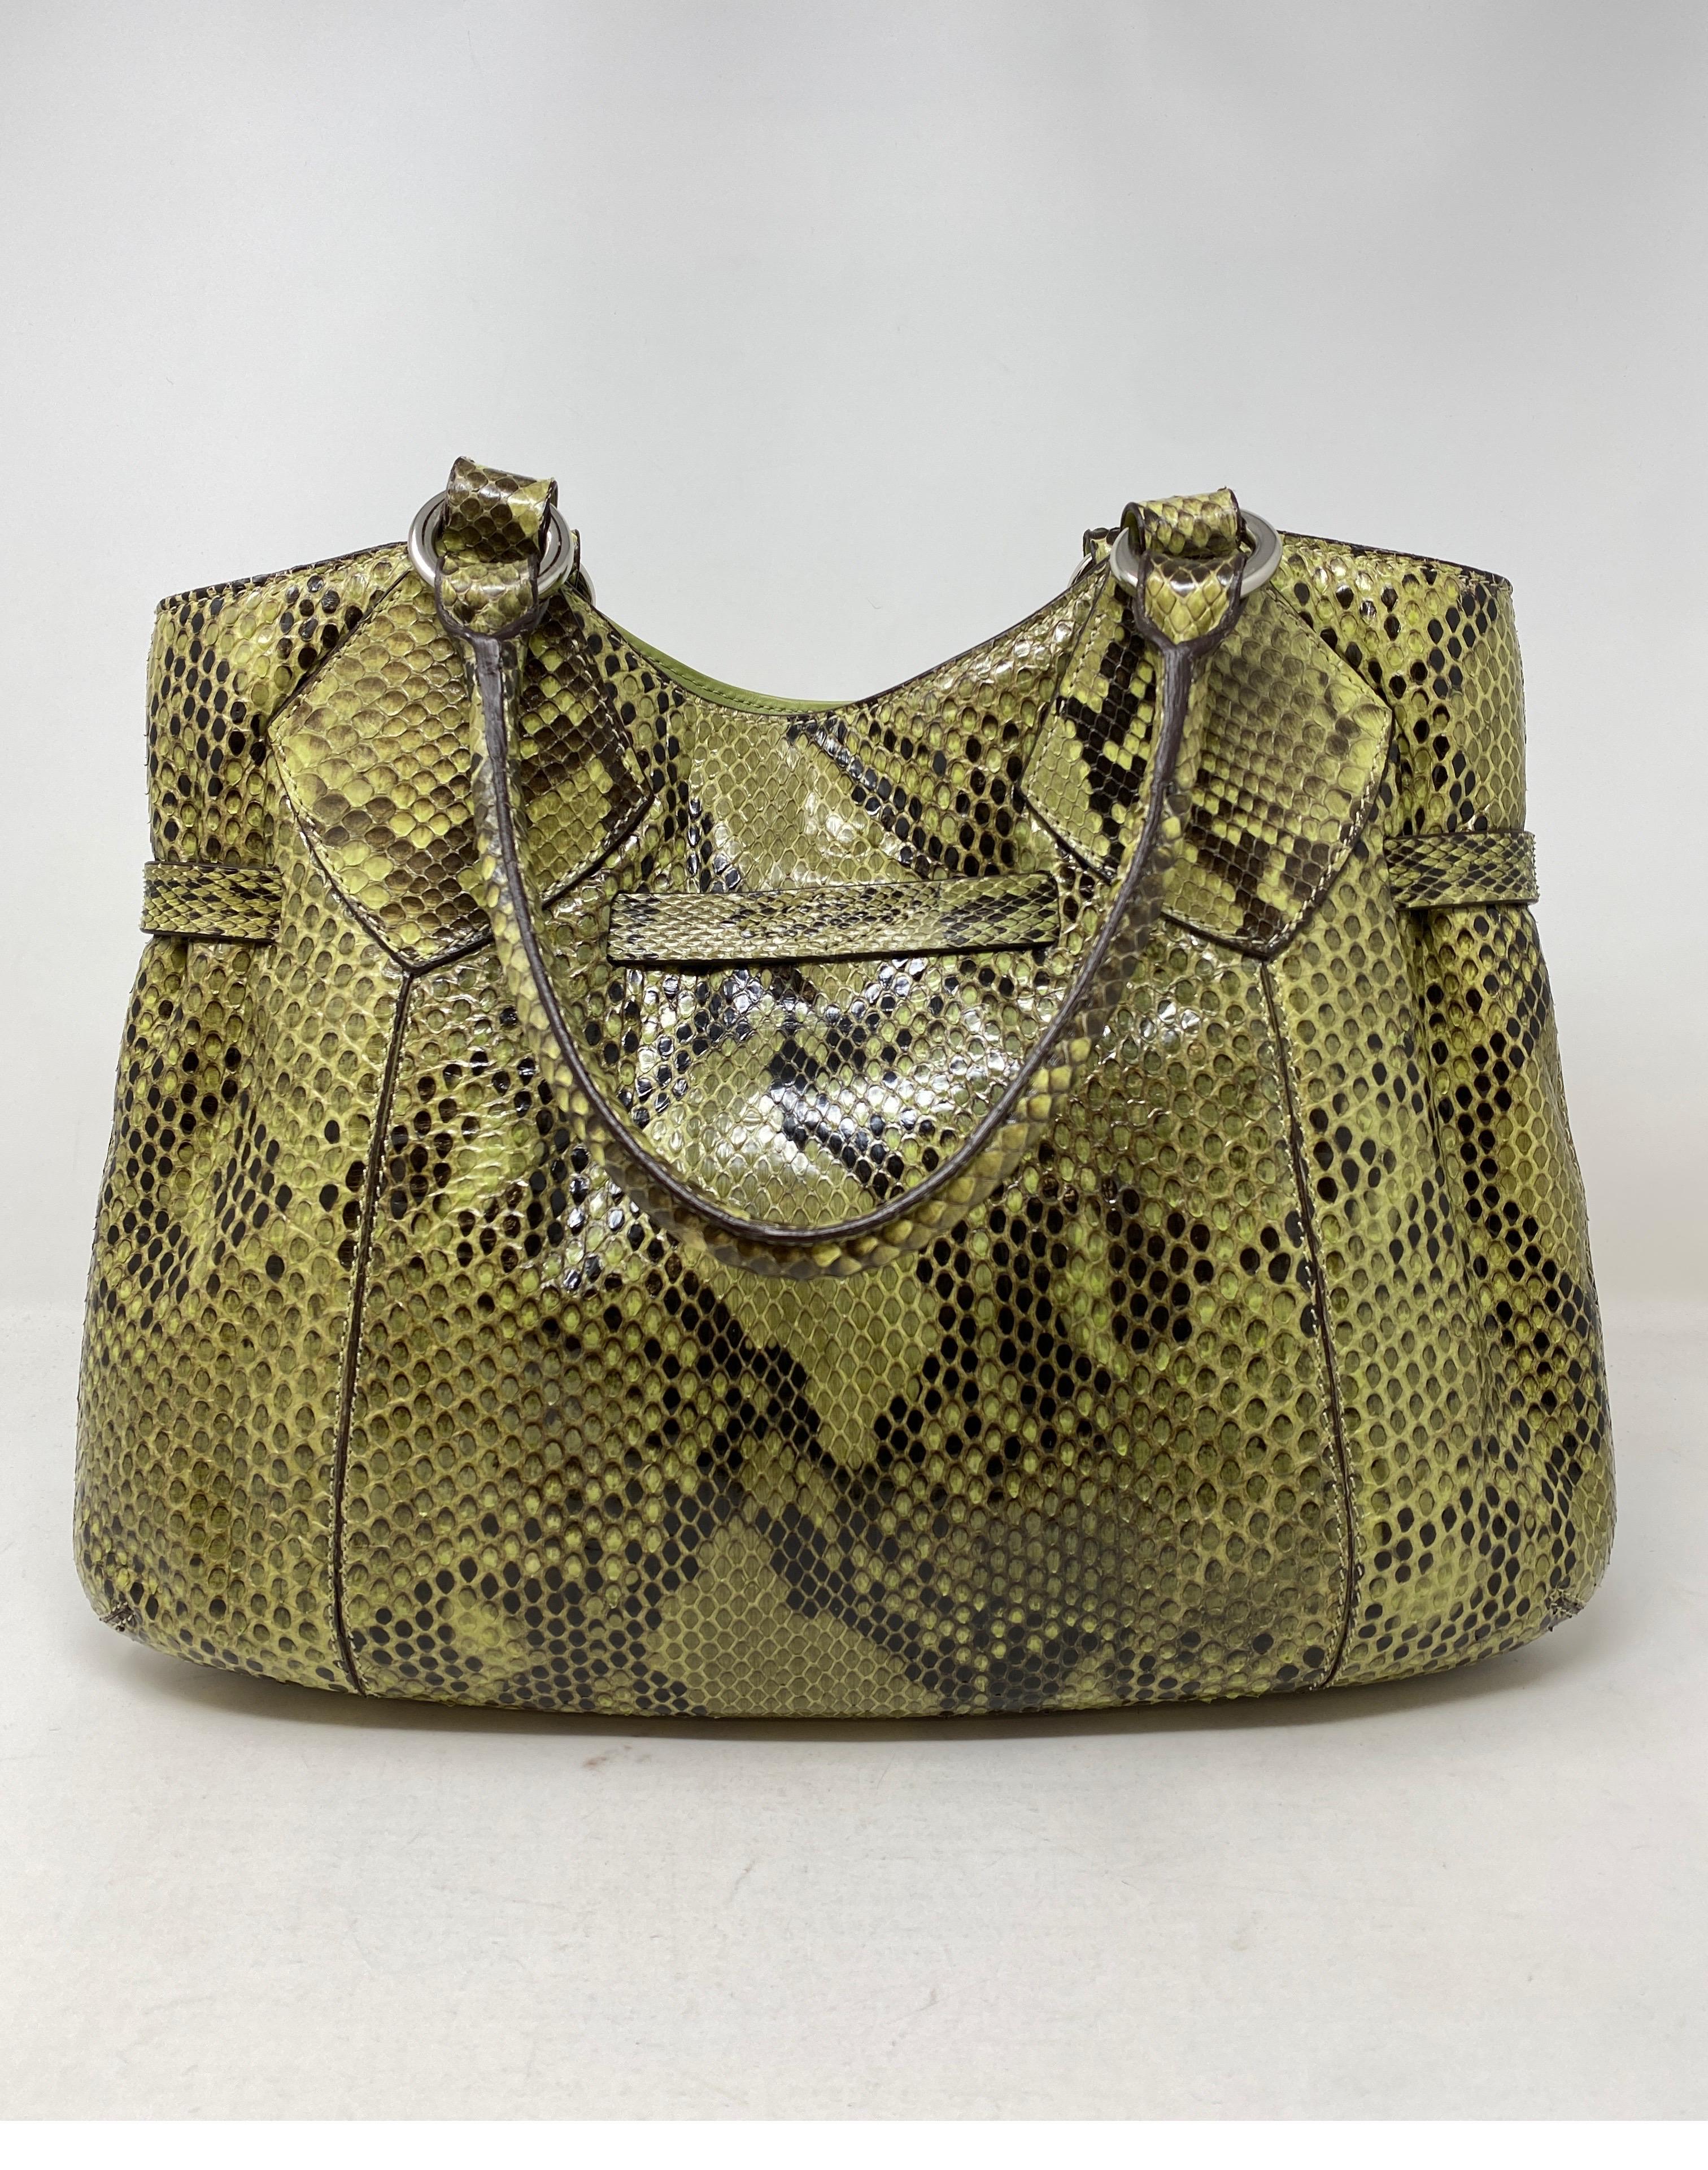 Mauro Governa Green Python Bag. Excellent condition python leather bag. Silver hardware. Nice shoulder bag. Purchased from Saks Fifth Avenue. Guaranteed authentic. 